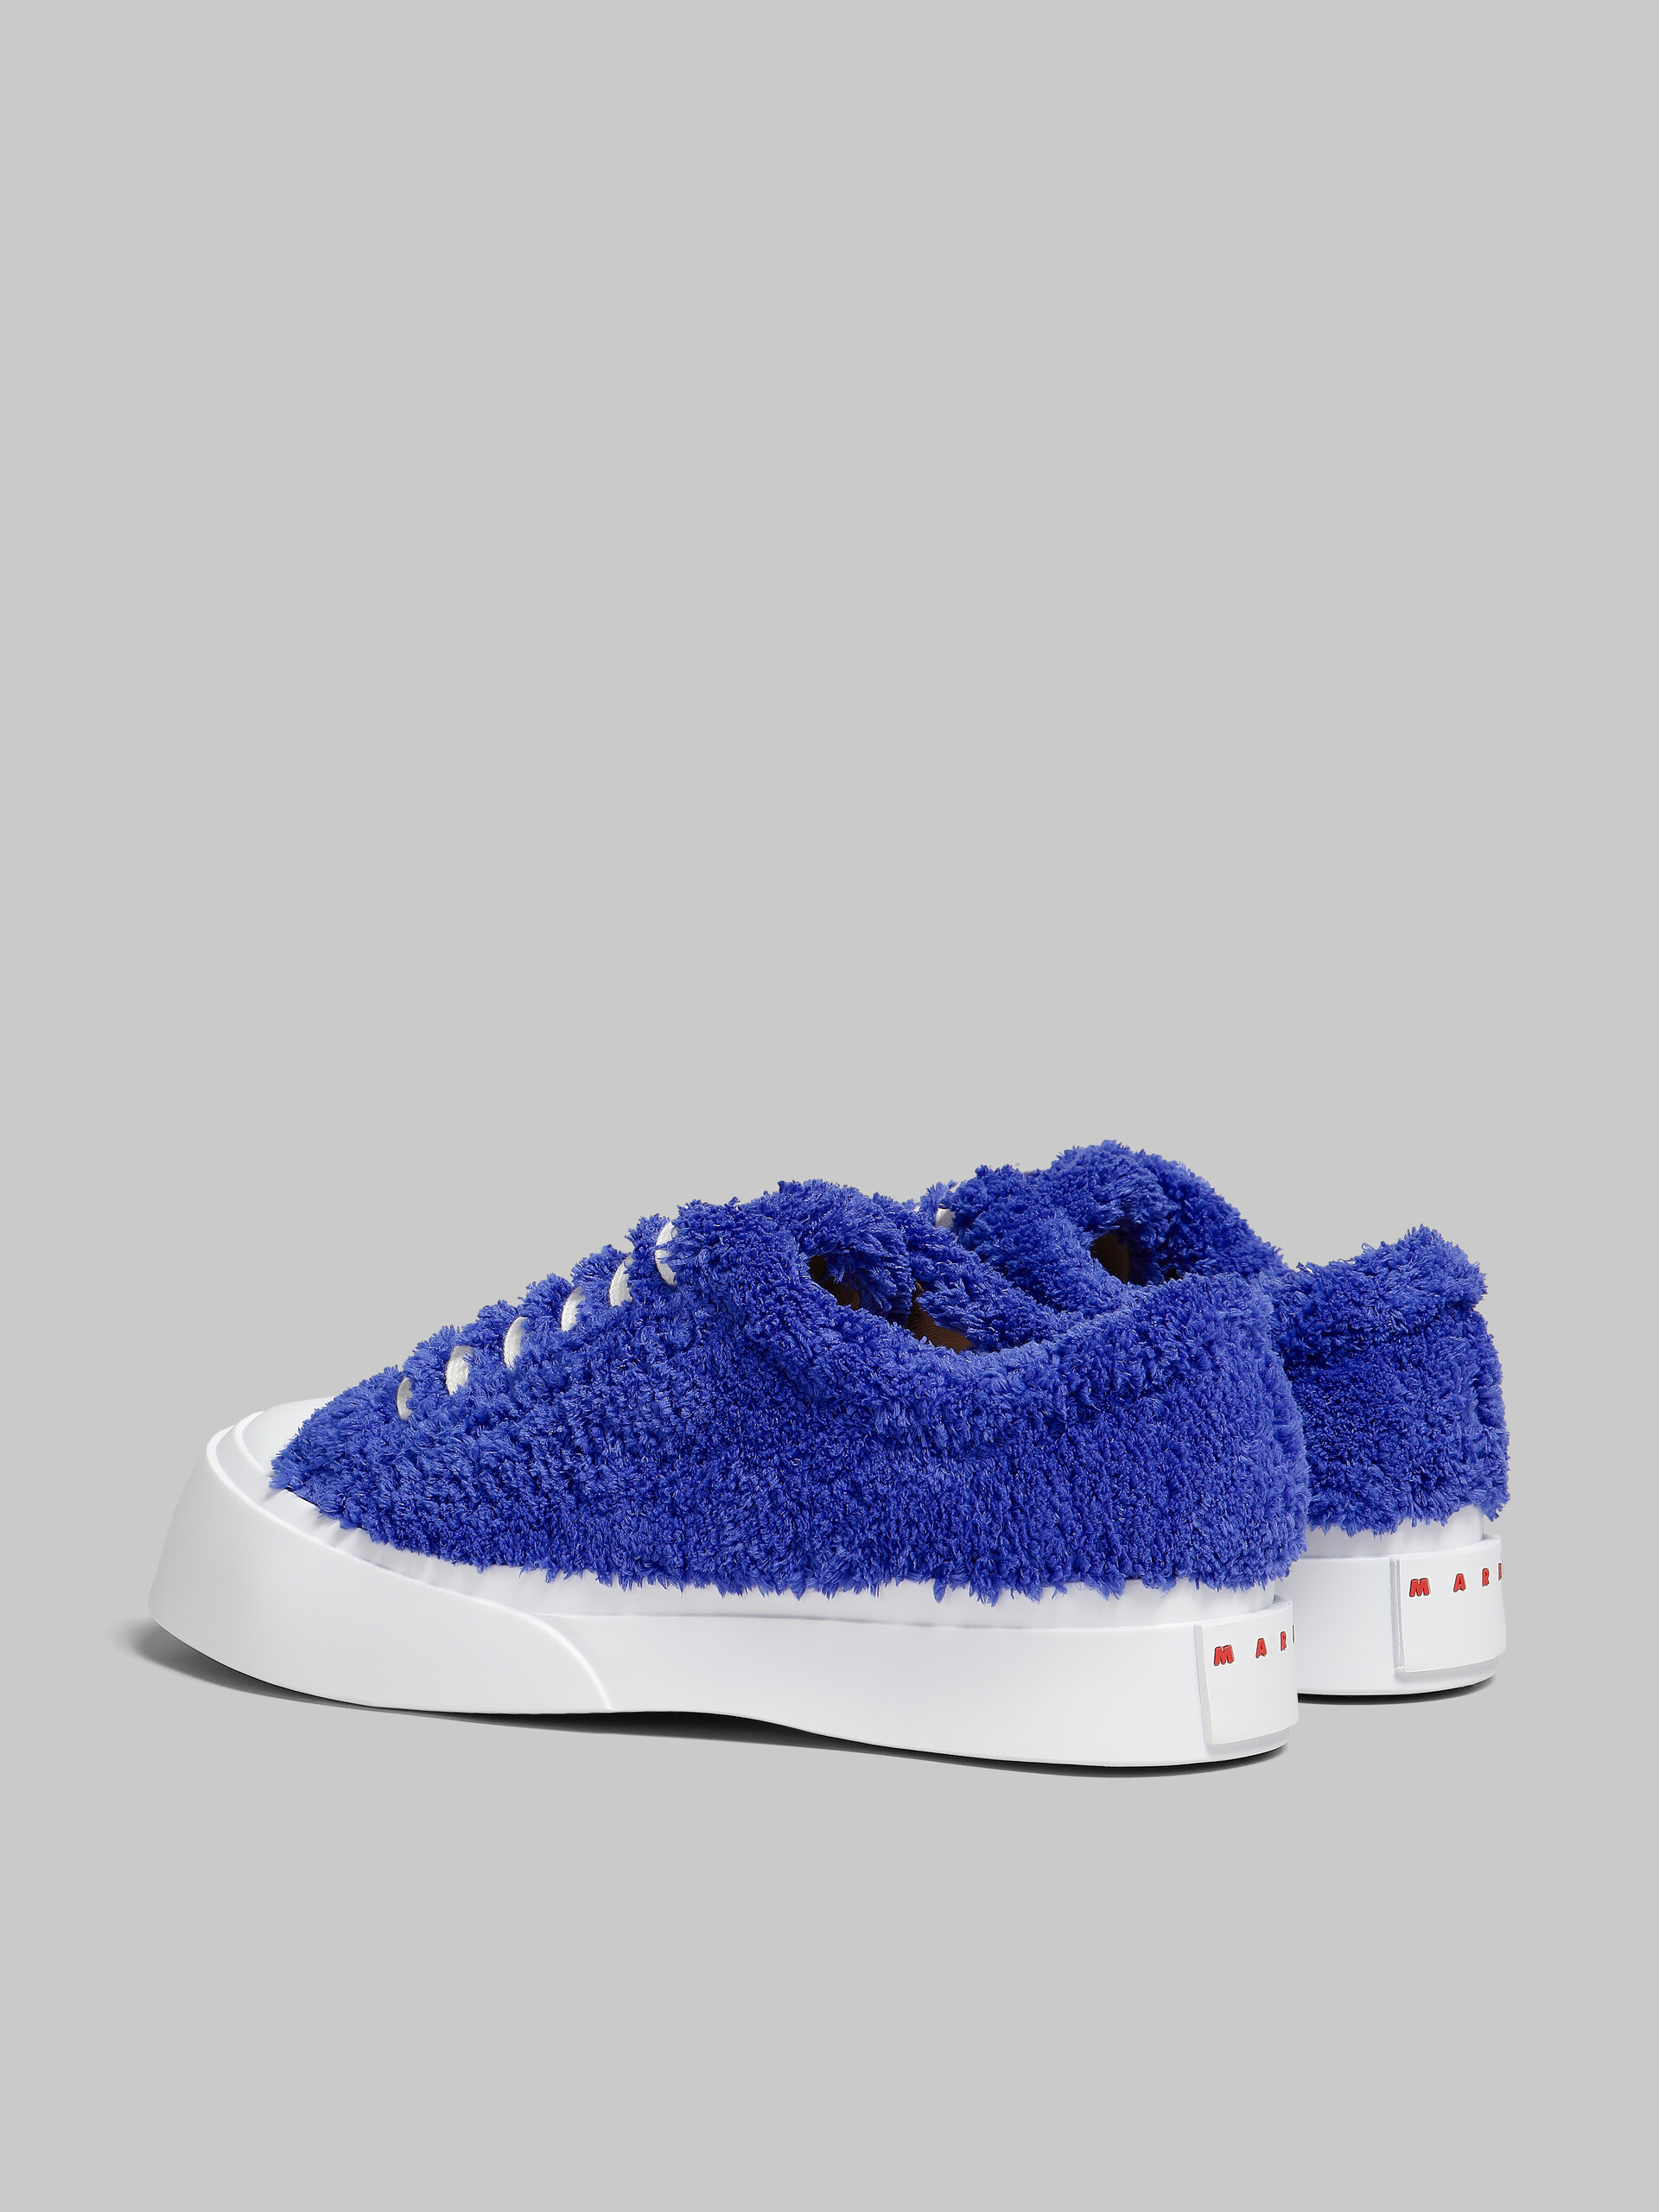 Blue Terry Pablo lace-up sneaker - Sneakers - Image 3